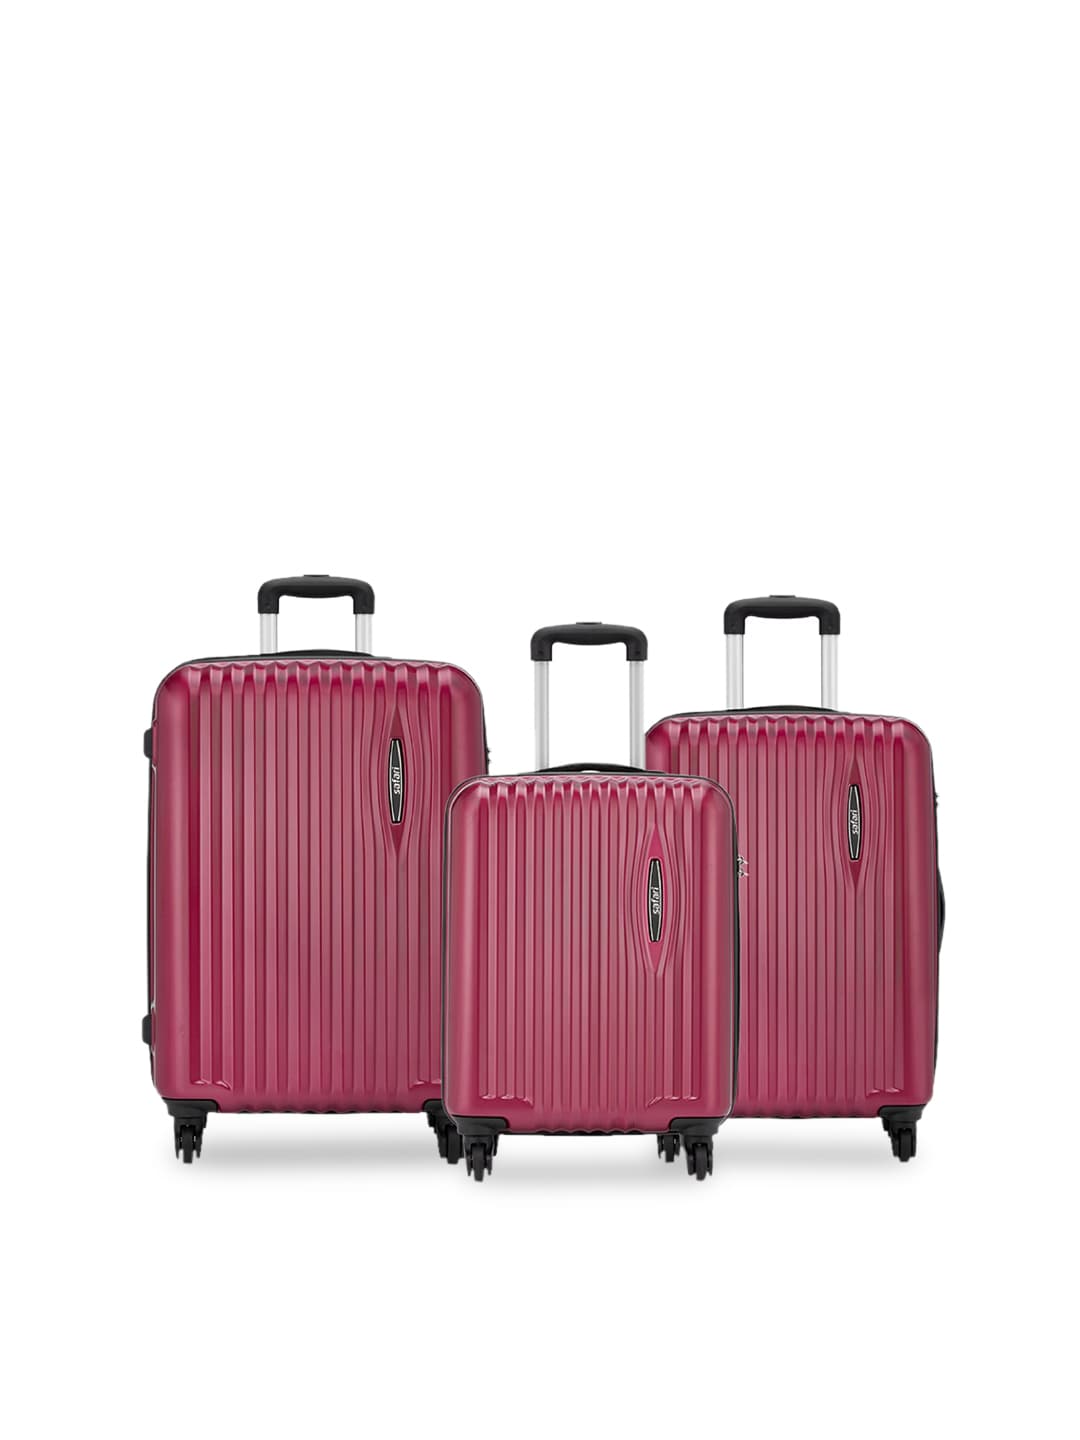 Safari Set of 3 Magneta Textured 360-Degree Rotation Hard-Sided Trolley Suitcases Price in India